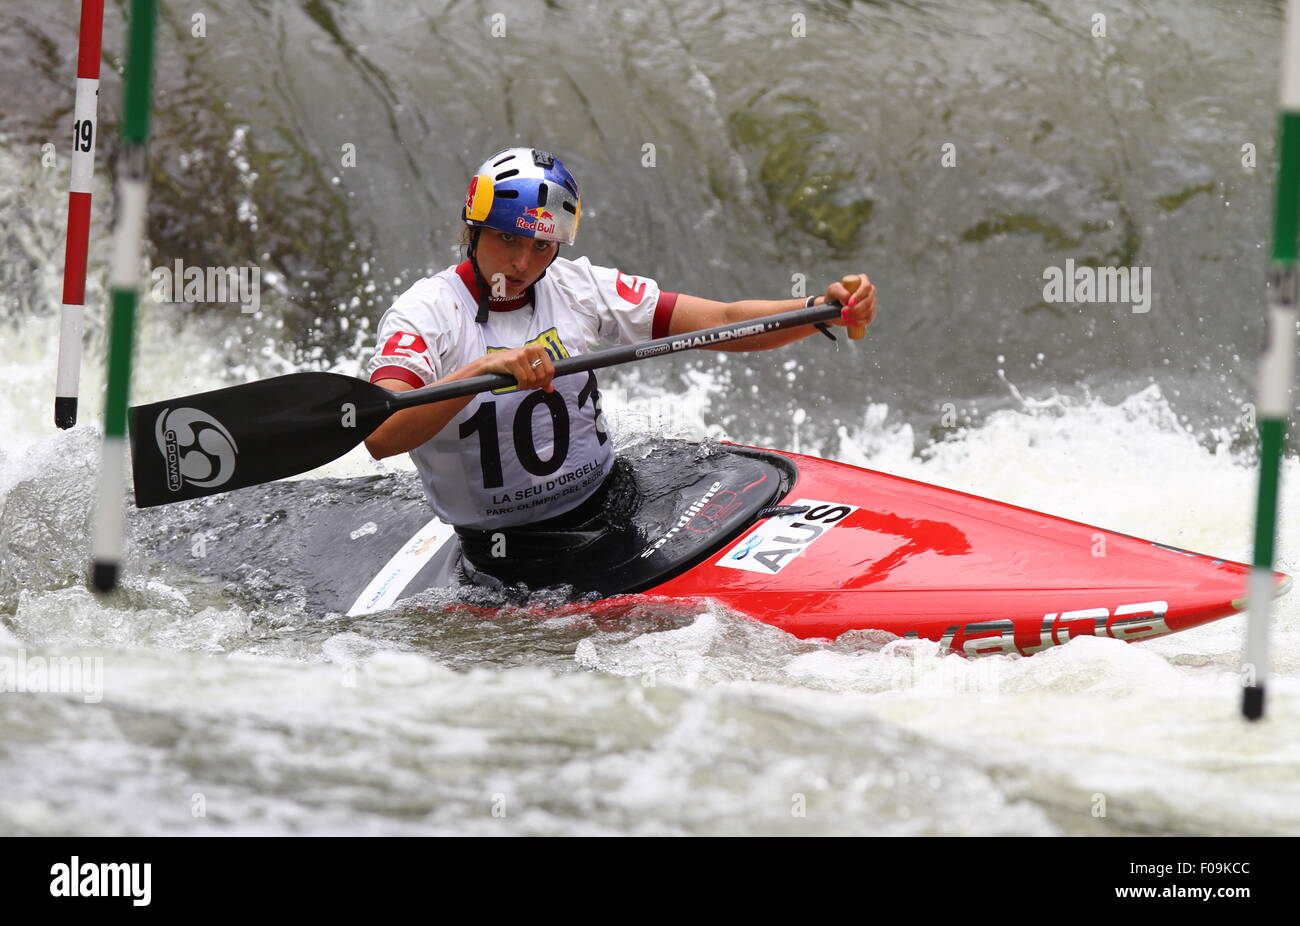 08.08.2015 La Seu d'Urgel, Lleida, Spain. ICF Canoe Slalom Womens World Cup 4. Jessica Fox (AUS) in action during canoe single (C1) womens final at Canal Olimpic Stock Photo